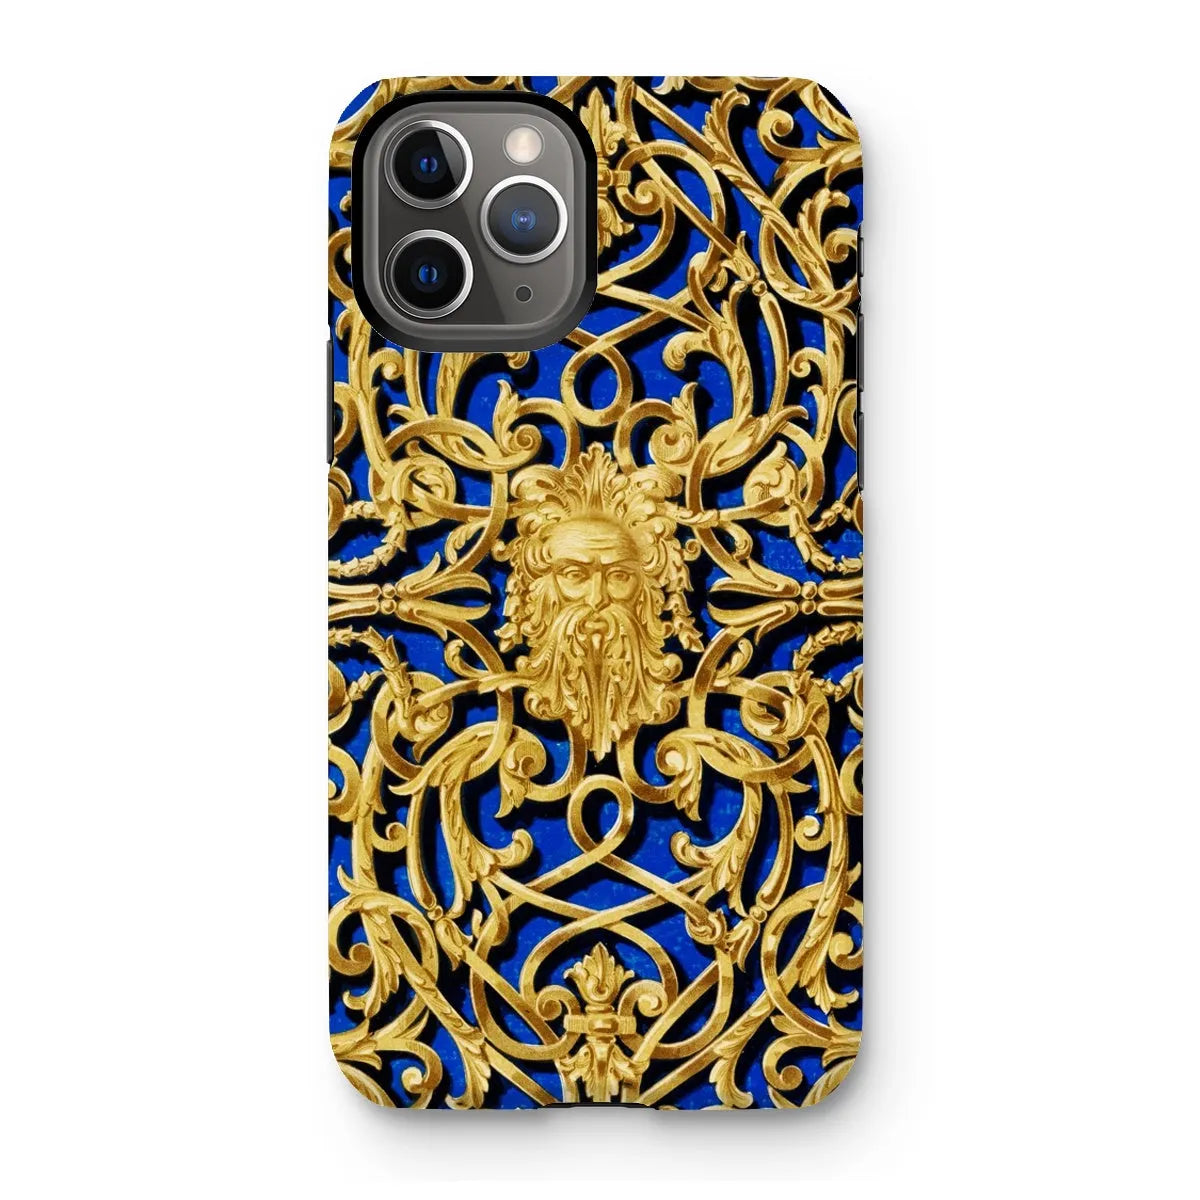 Gilded Gate Victorian Phone Case - Sir Matthew Digby Wyatt - Iphone 11 Pro / Matte - Mobile Phone Cases - Aesthetic Art